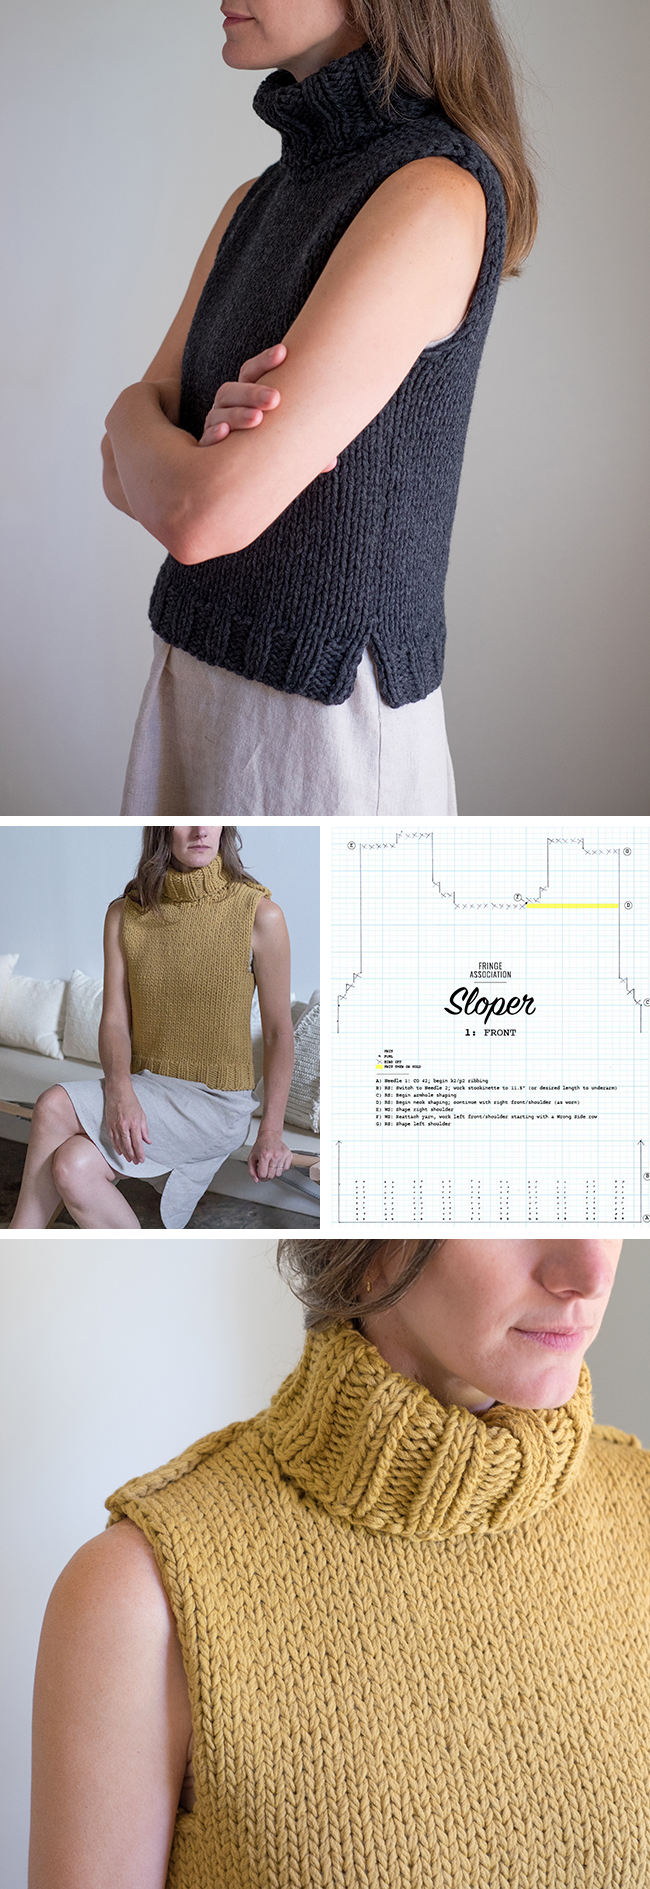 How to improvise a top-down sweater, Part 2: Raglans and neck